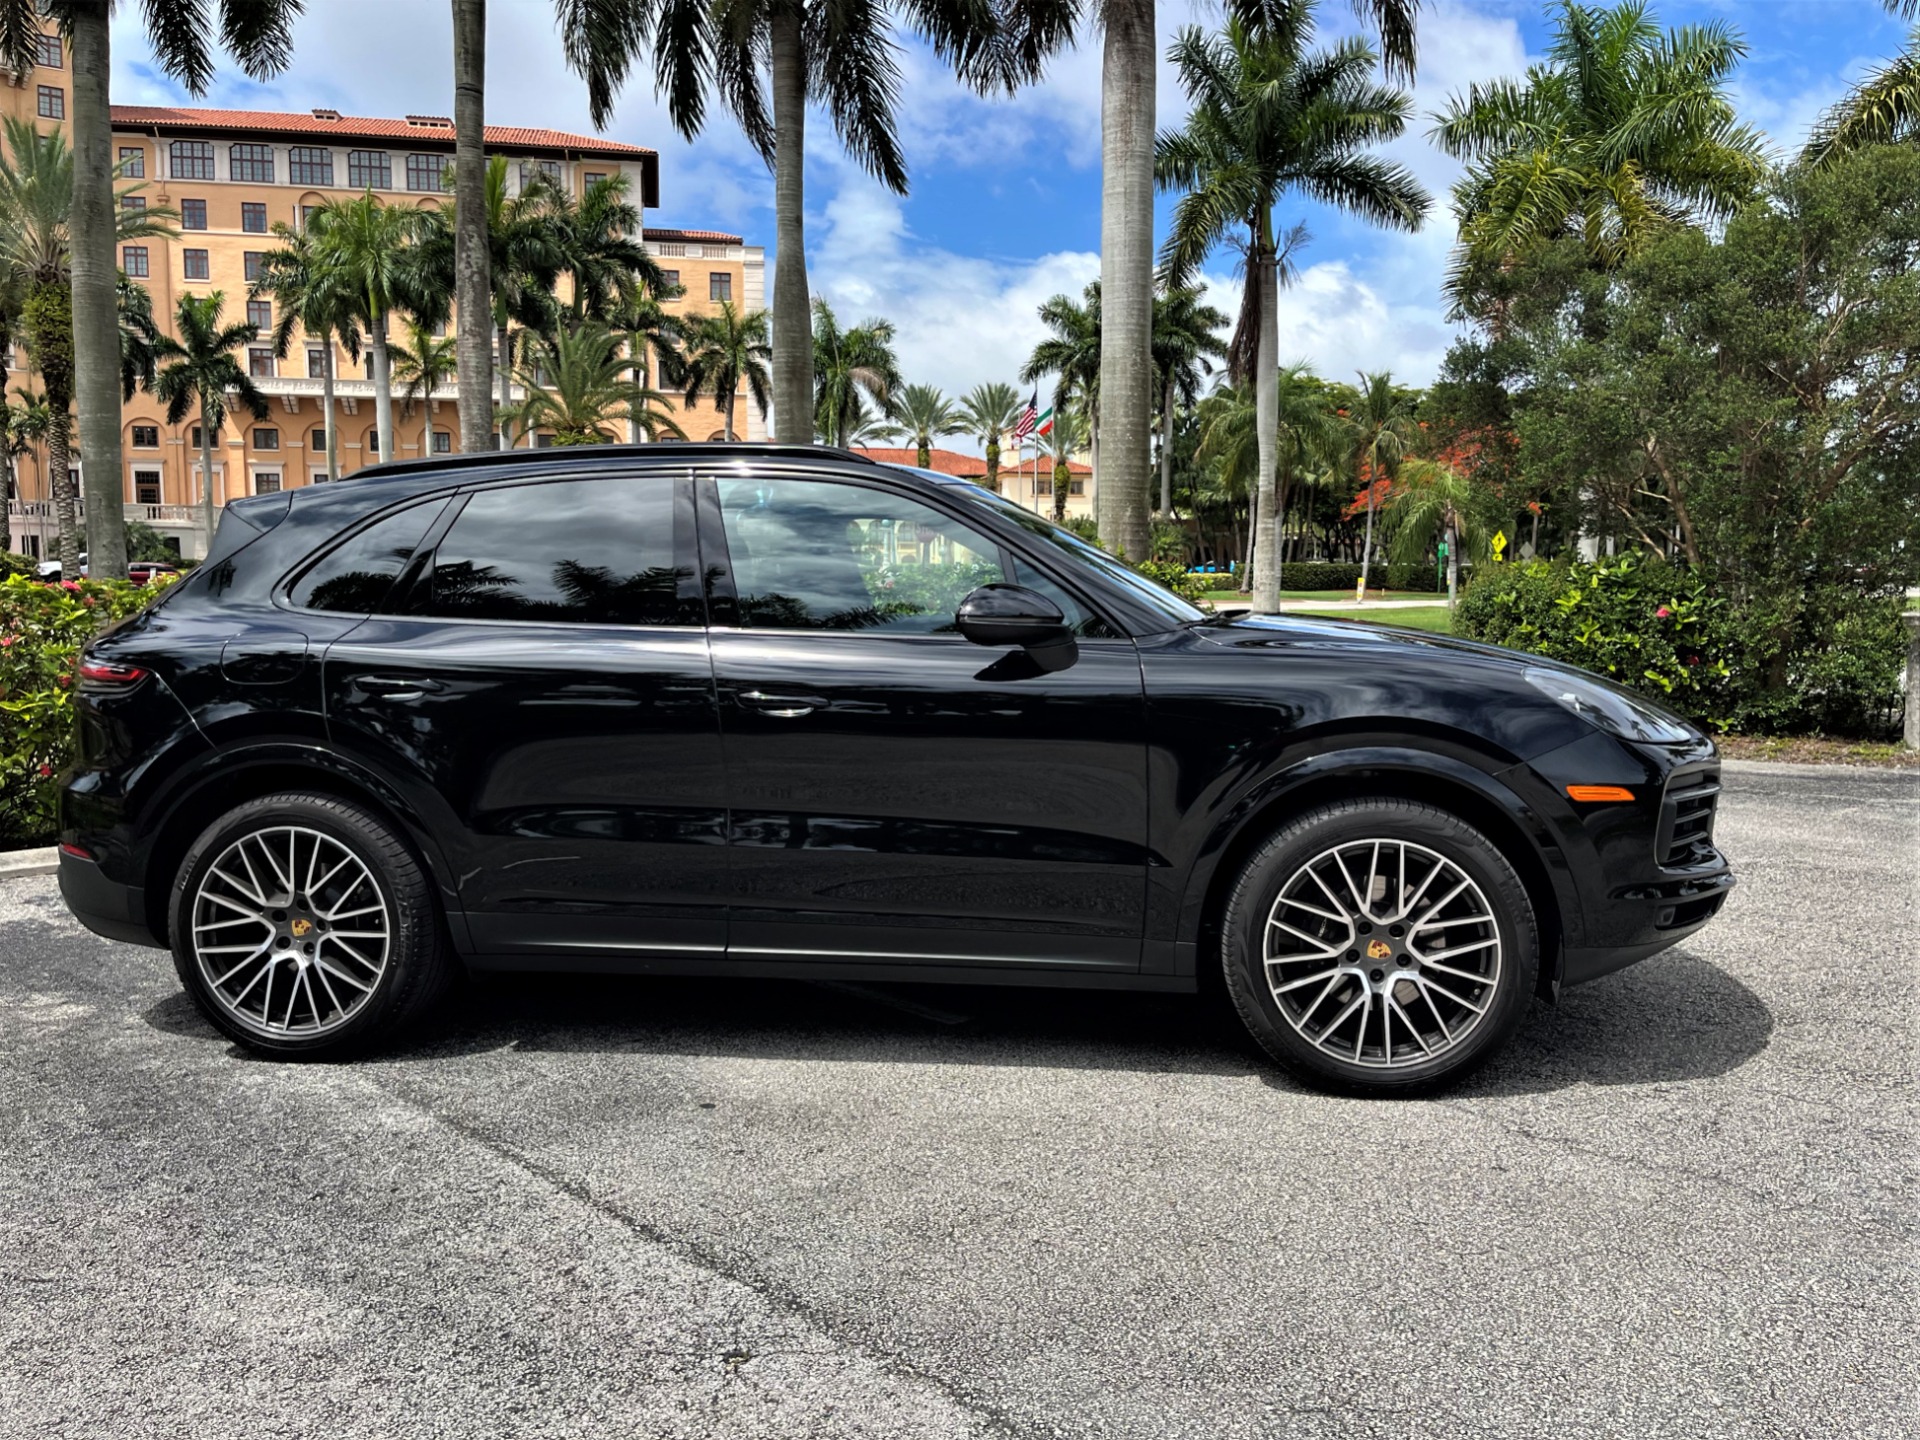 Used 2020 Porsche Cayenne for sale Sold at The Gables Sports Cars in Miami FL 33146 4